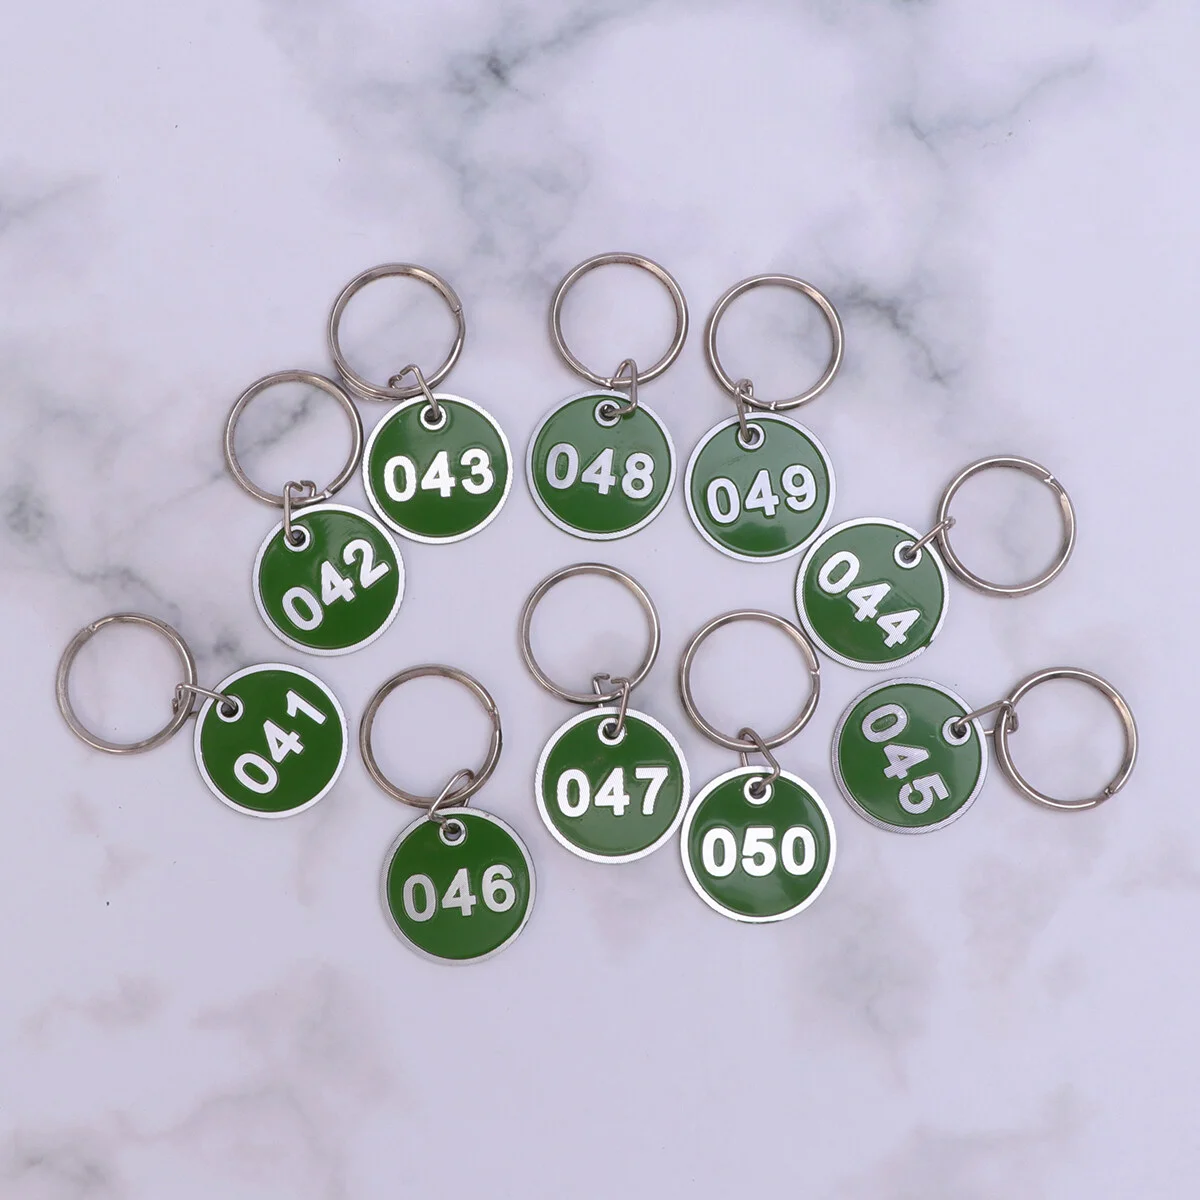 

50Pcs Aluminium Alloy Storage Tags Metal Numbers Plates Luggage ID Tags Key Ring Labels (Number 1-50)